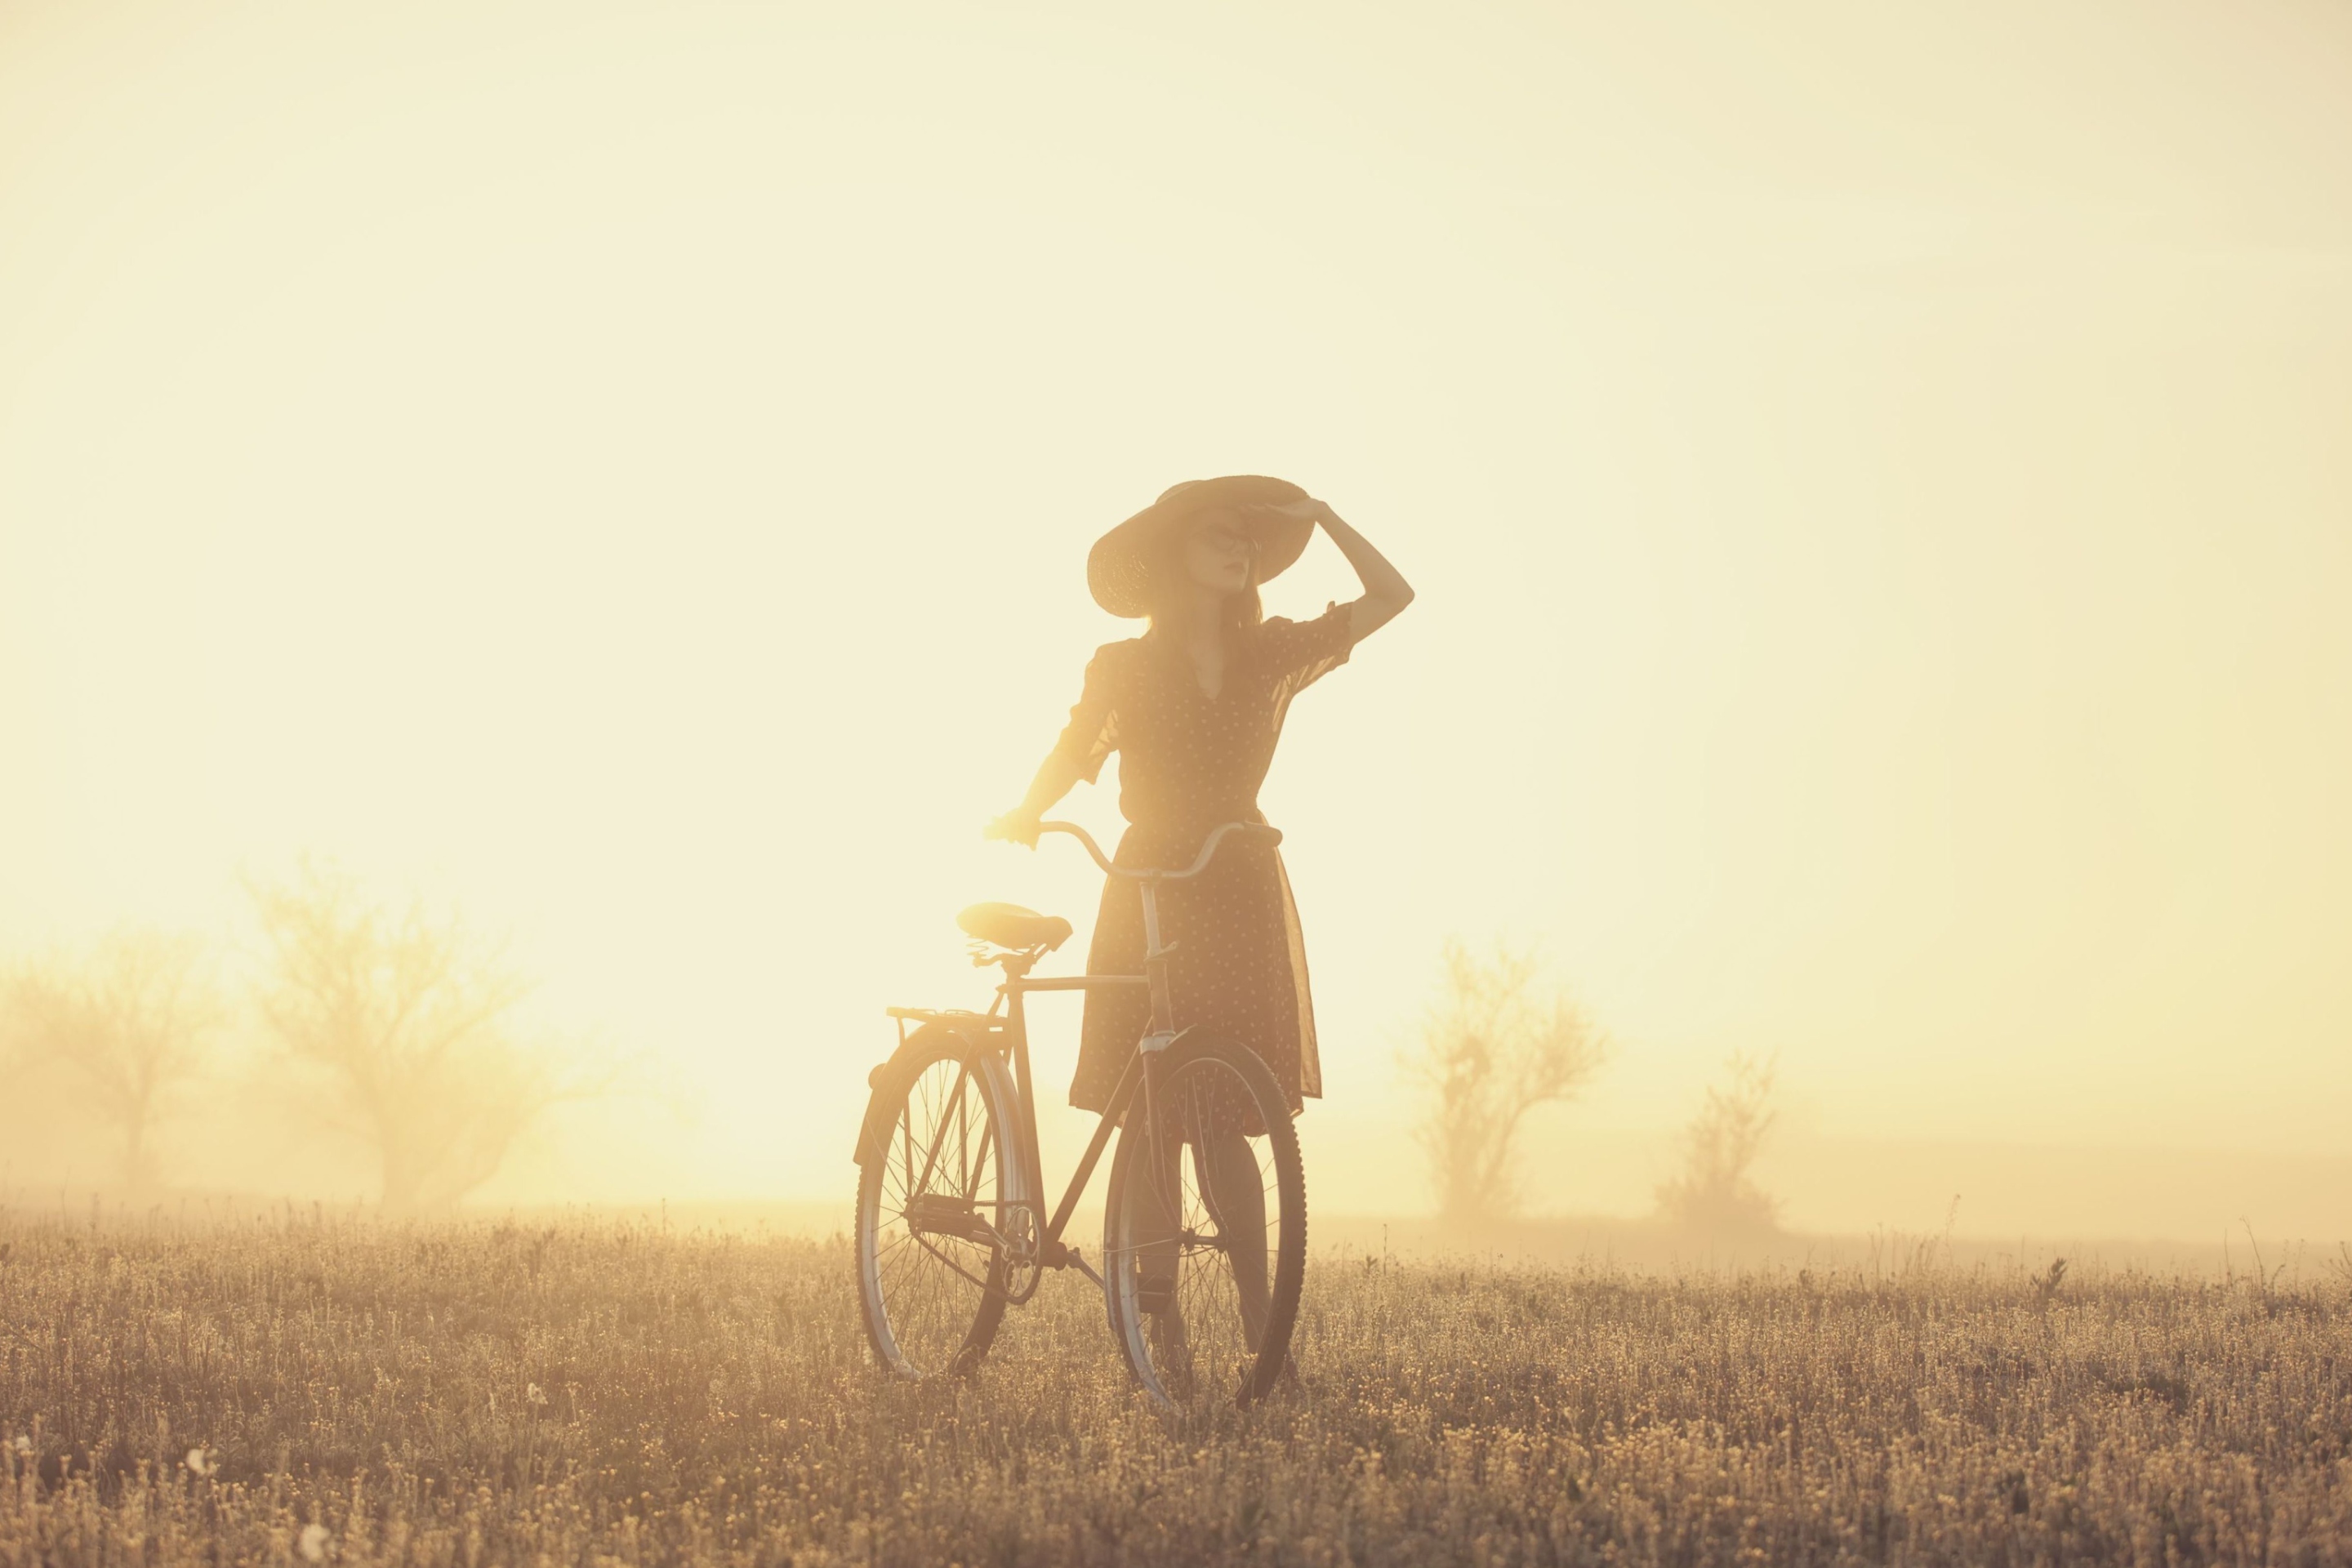 Das Girl And Bicycle On Misty Day Wallpaper 2880x1920